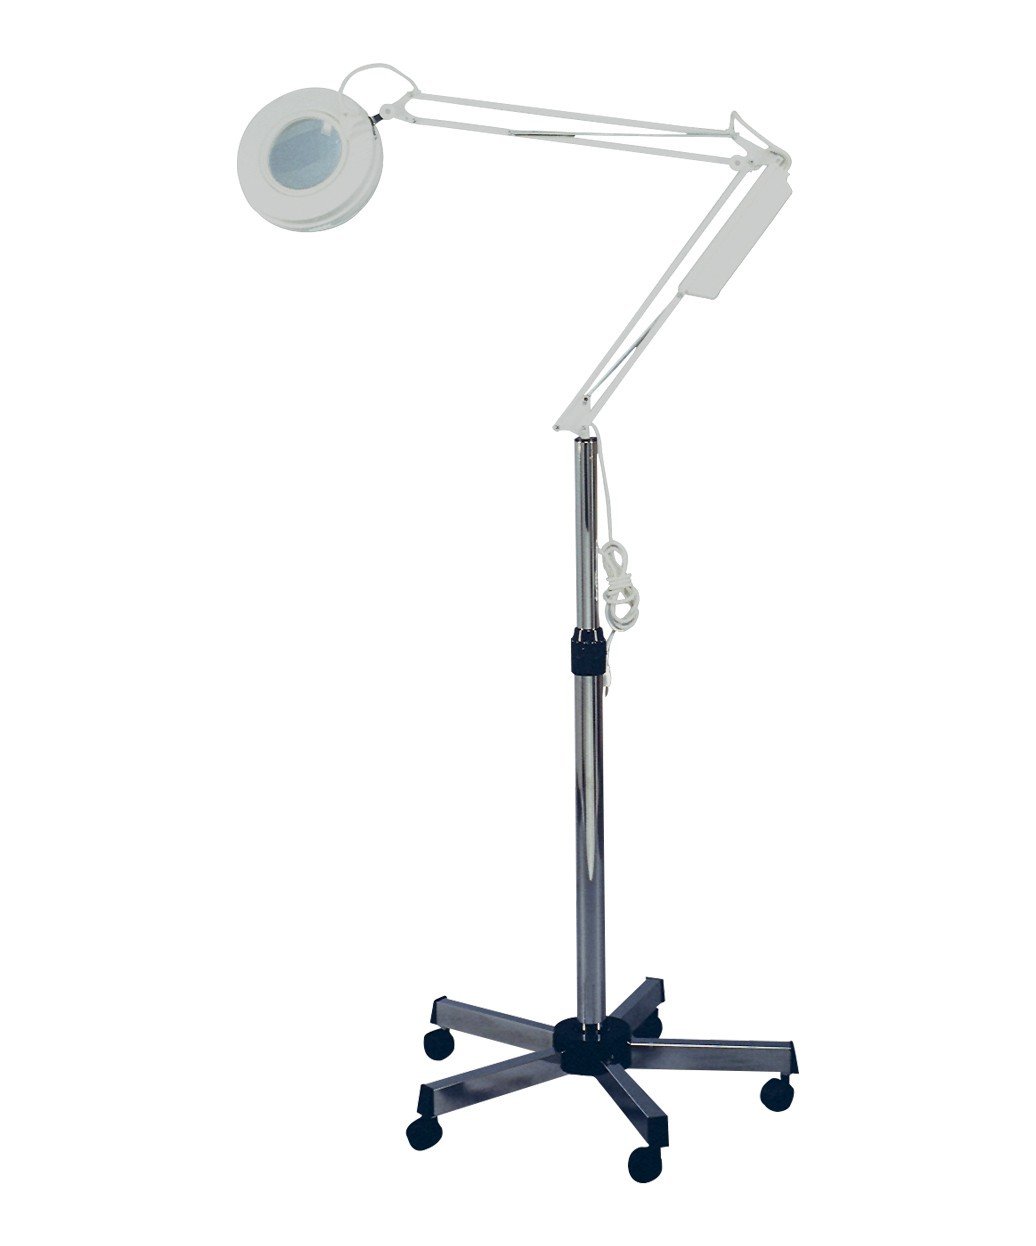 Pibbs 2010 Magnifying Lamp on Casters